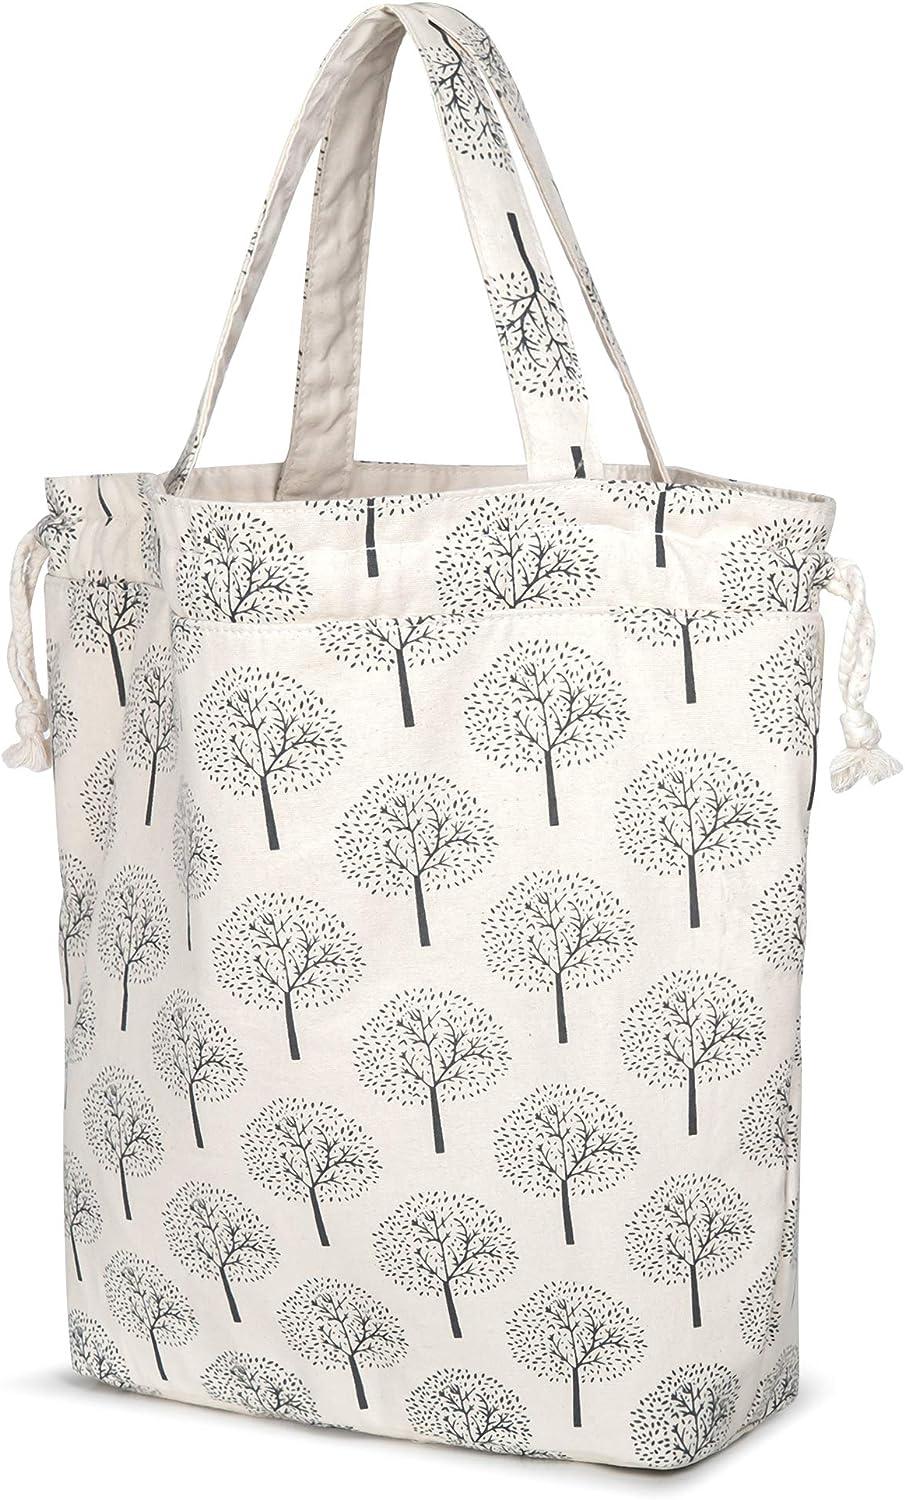 Teamoy Knitting Tote Bag with Drawstring Closure, Portable Yarn Storage Bag  for Knitting Needles, Yarn Skein and Crochet Supplies, Tree (Bag Only)